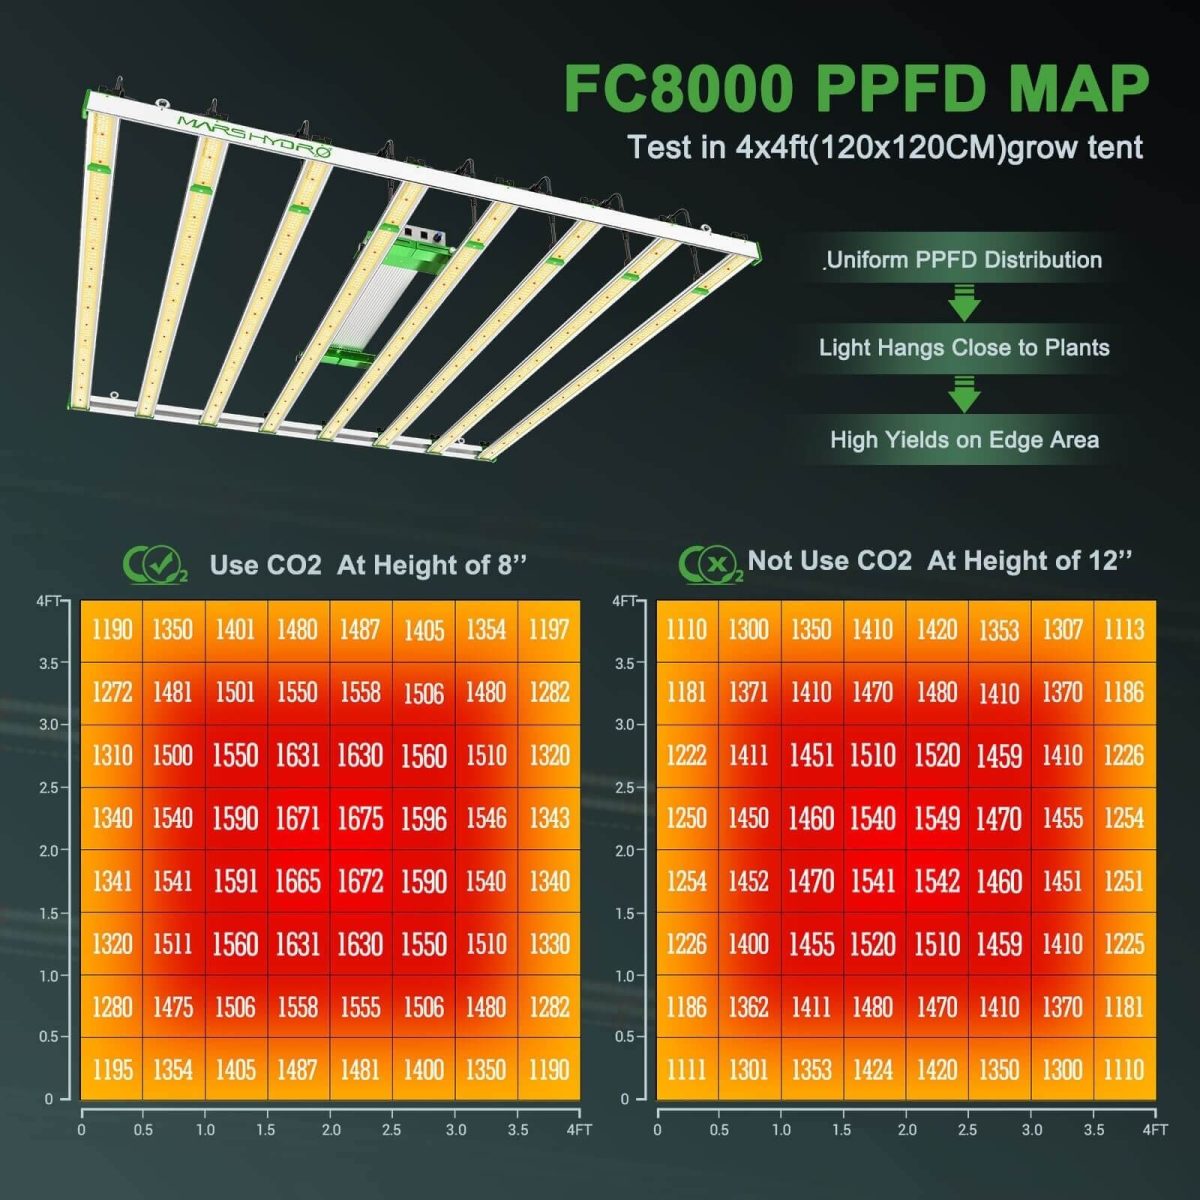 Two PPFD maps of FC8000 tested in a 4'x4' grow tent at 8 inches for co2 added growth and at 12 inches without co2 added.